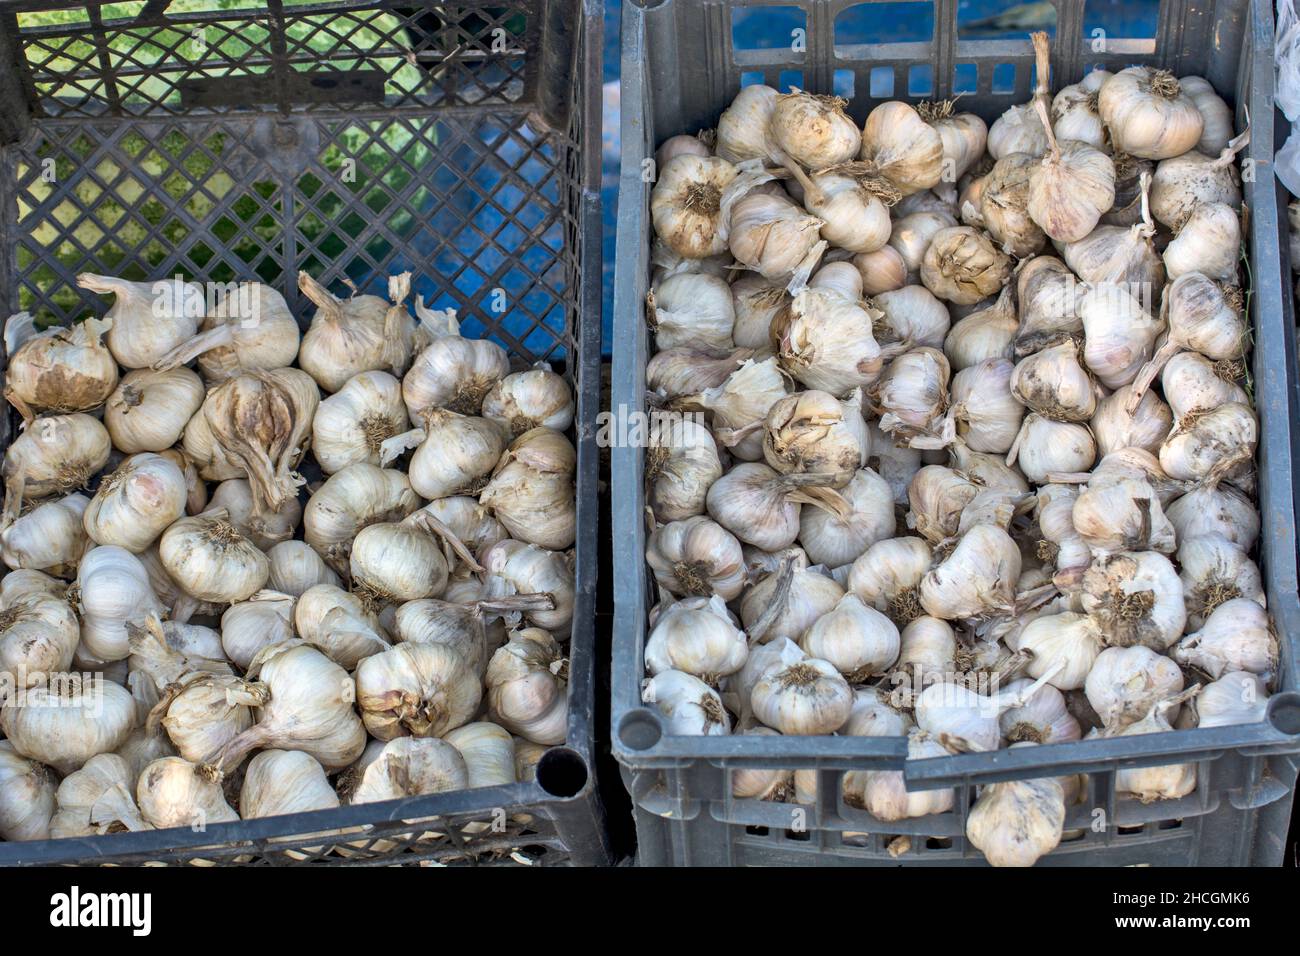 Selling garlic heads in a pile in a crate. Garlic is very healthy for human consumption. Stock Photo